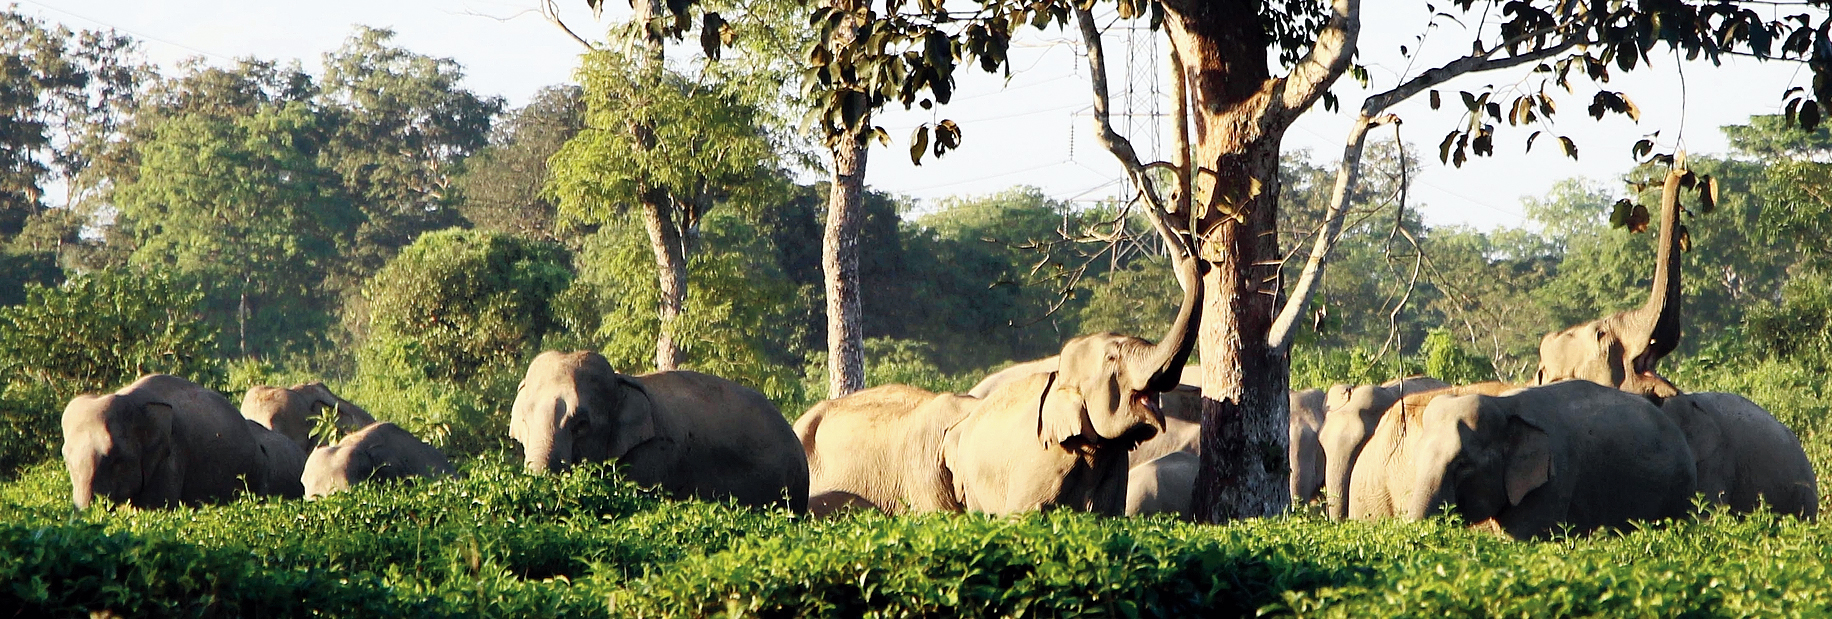 In Assam, man-elephant conflict has been frequent in Udalguri, Sonitpur, Nagaon, Karbi Anglong, Golaghat and Majuli districts over the past few years.
